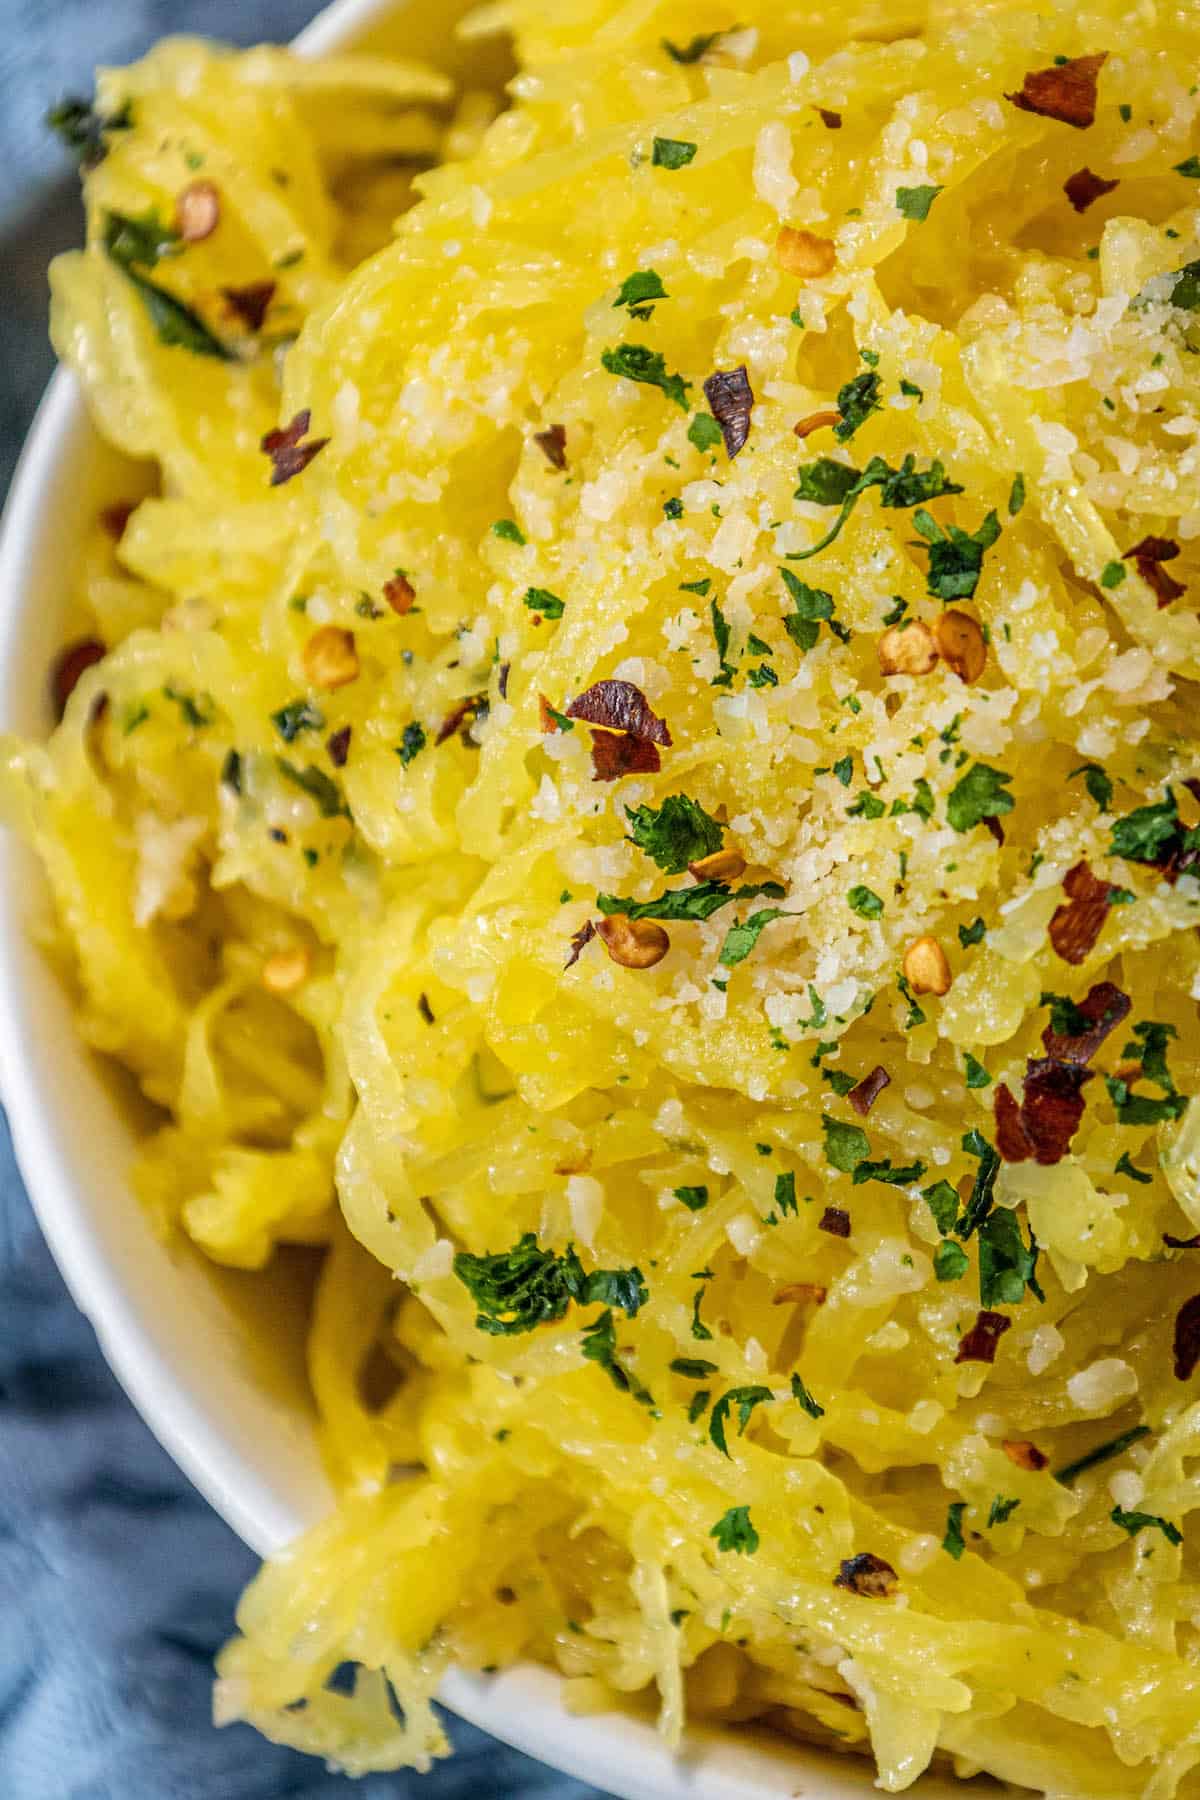 A bowl of yellow spaghetti squash with parmesan cheese and parsley.